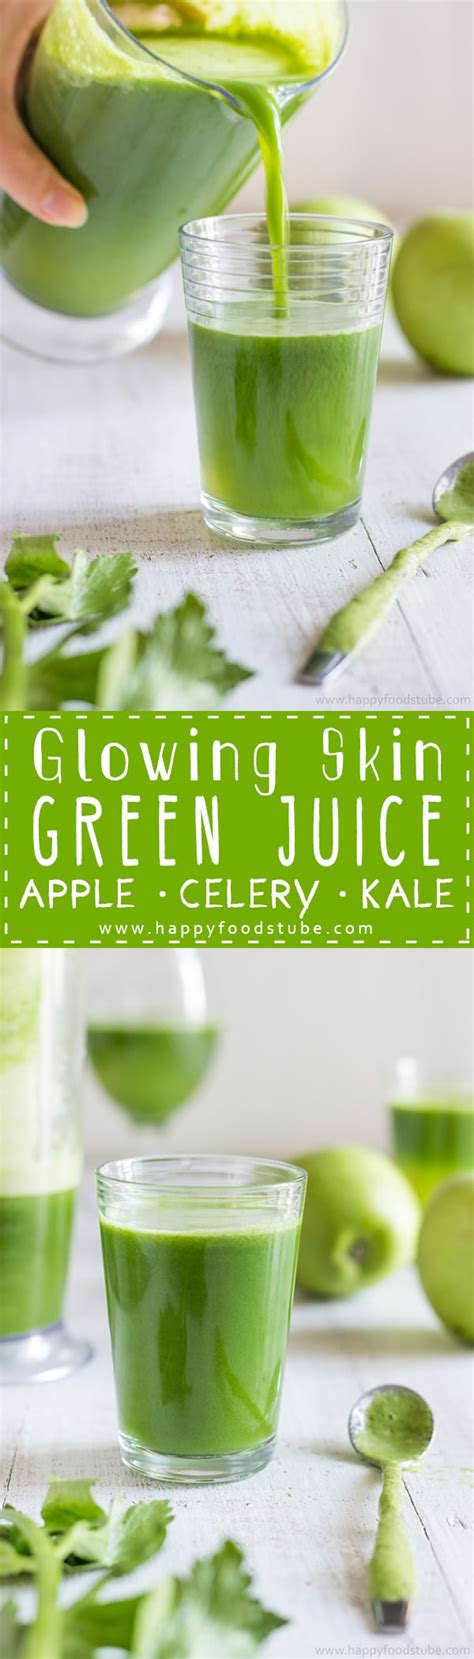 You'll use a blender instead of a juicer for this recipe, but the result is much closer to the consistency of a juice than a. Glowing Skin Green Juice Recipe - Happy Foods Tube